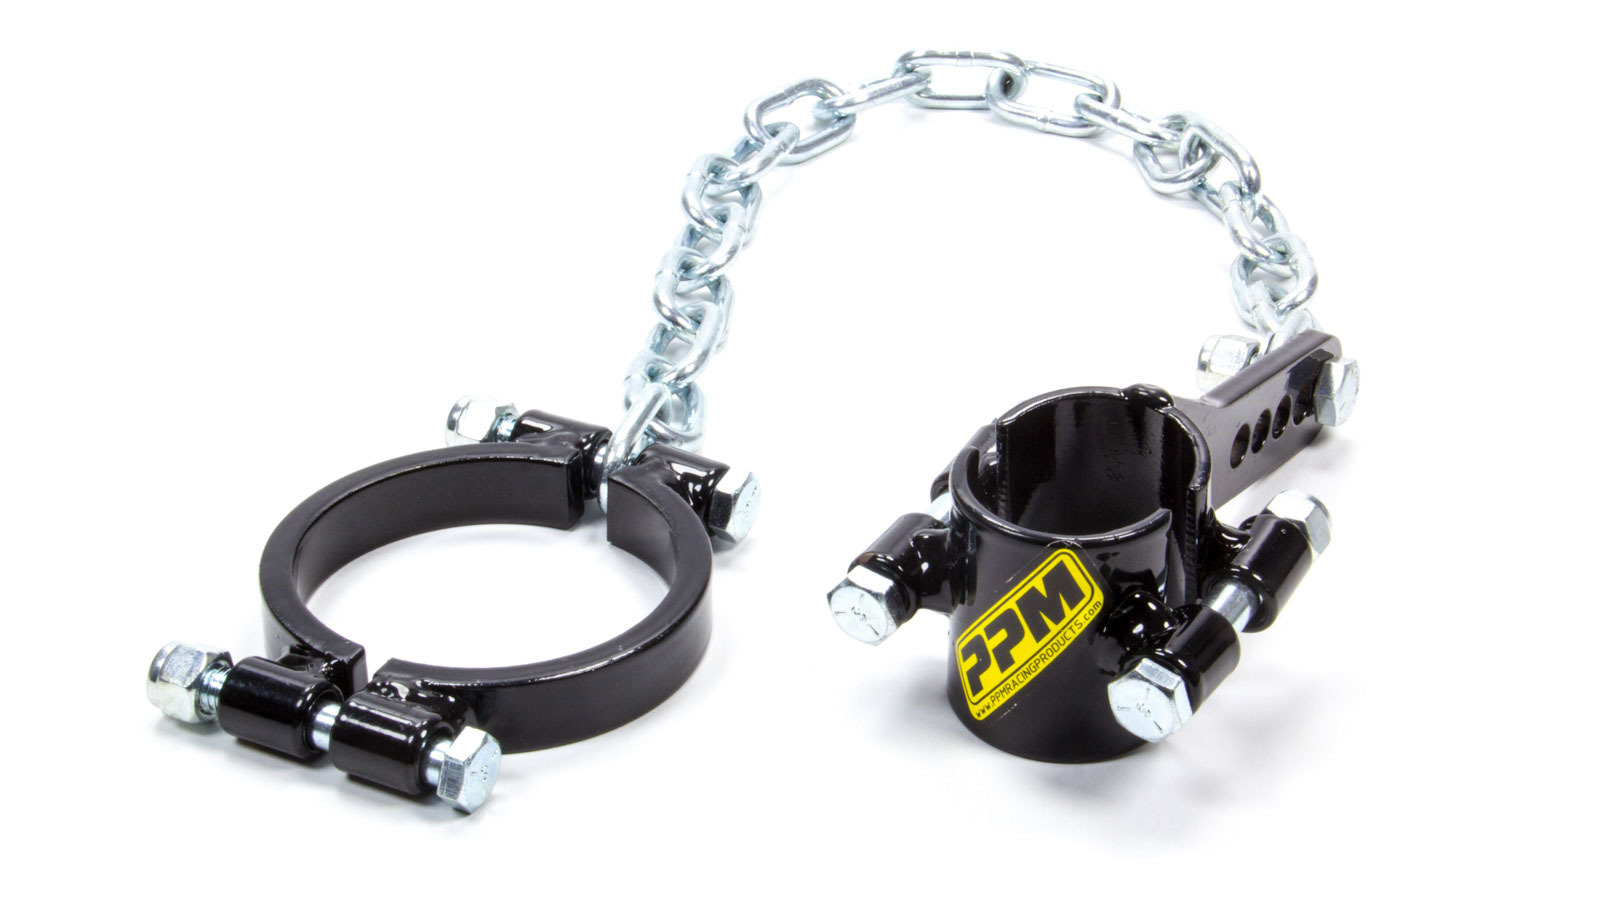 PPM Racing 0150LC Suspension Travel Limiter, Bolt-On, Chains / Clamps, 1-1/2 in Clamp, Black Anodized, Rear Suspension, Each